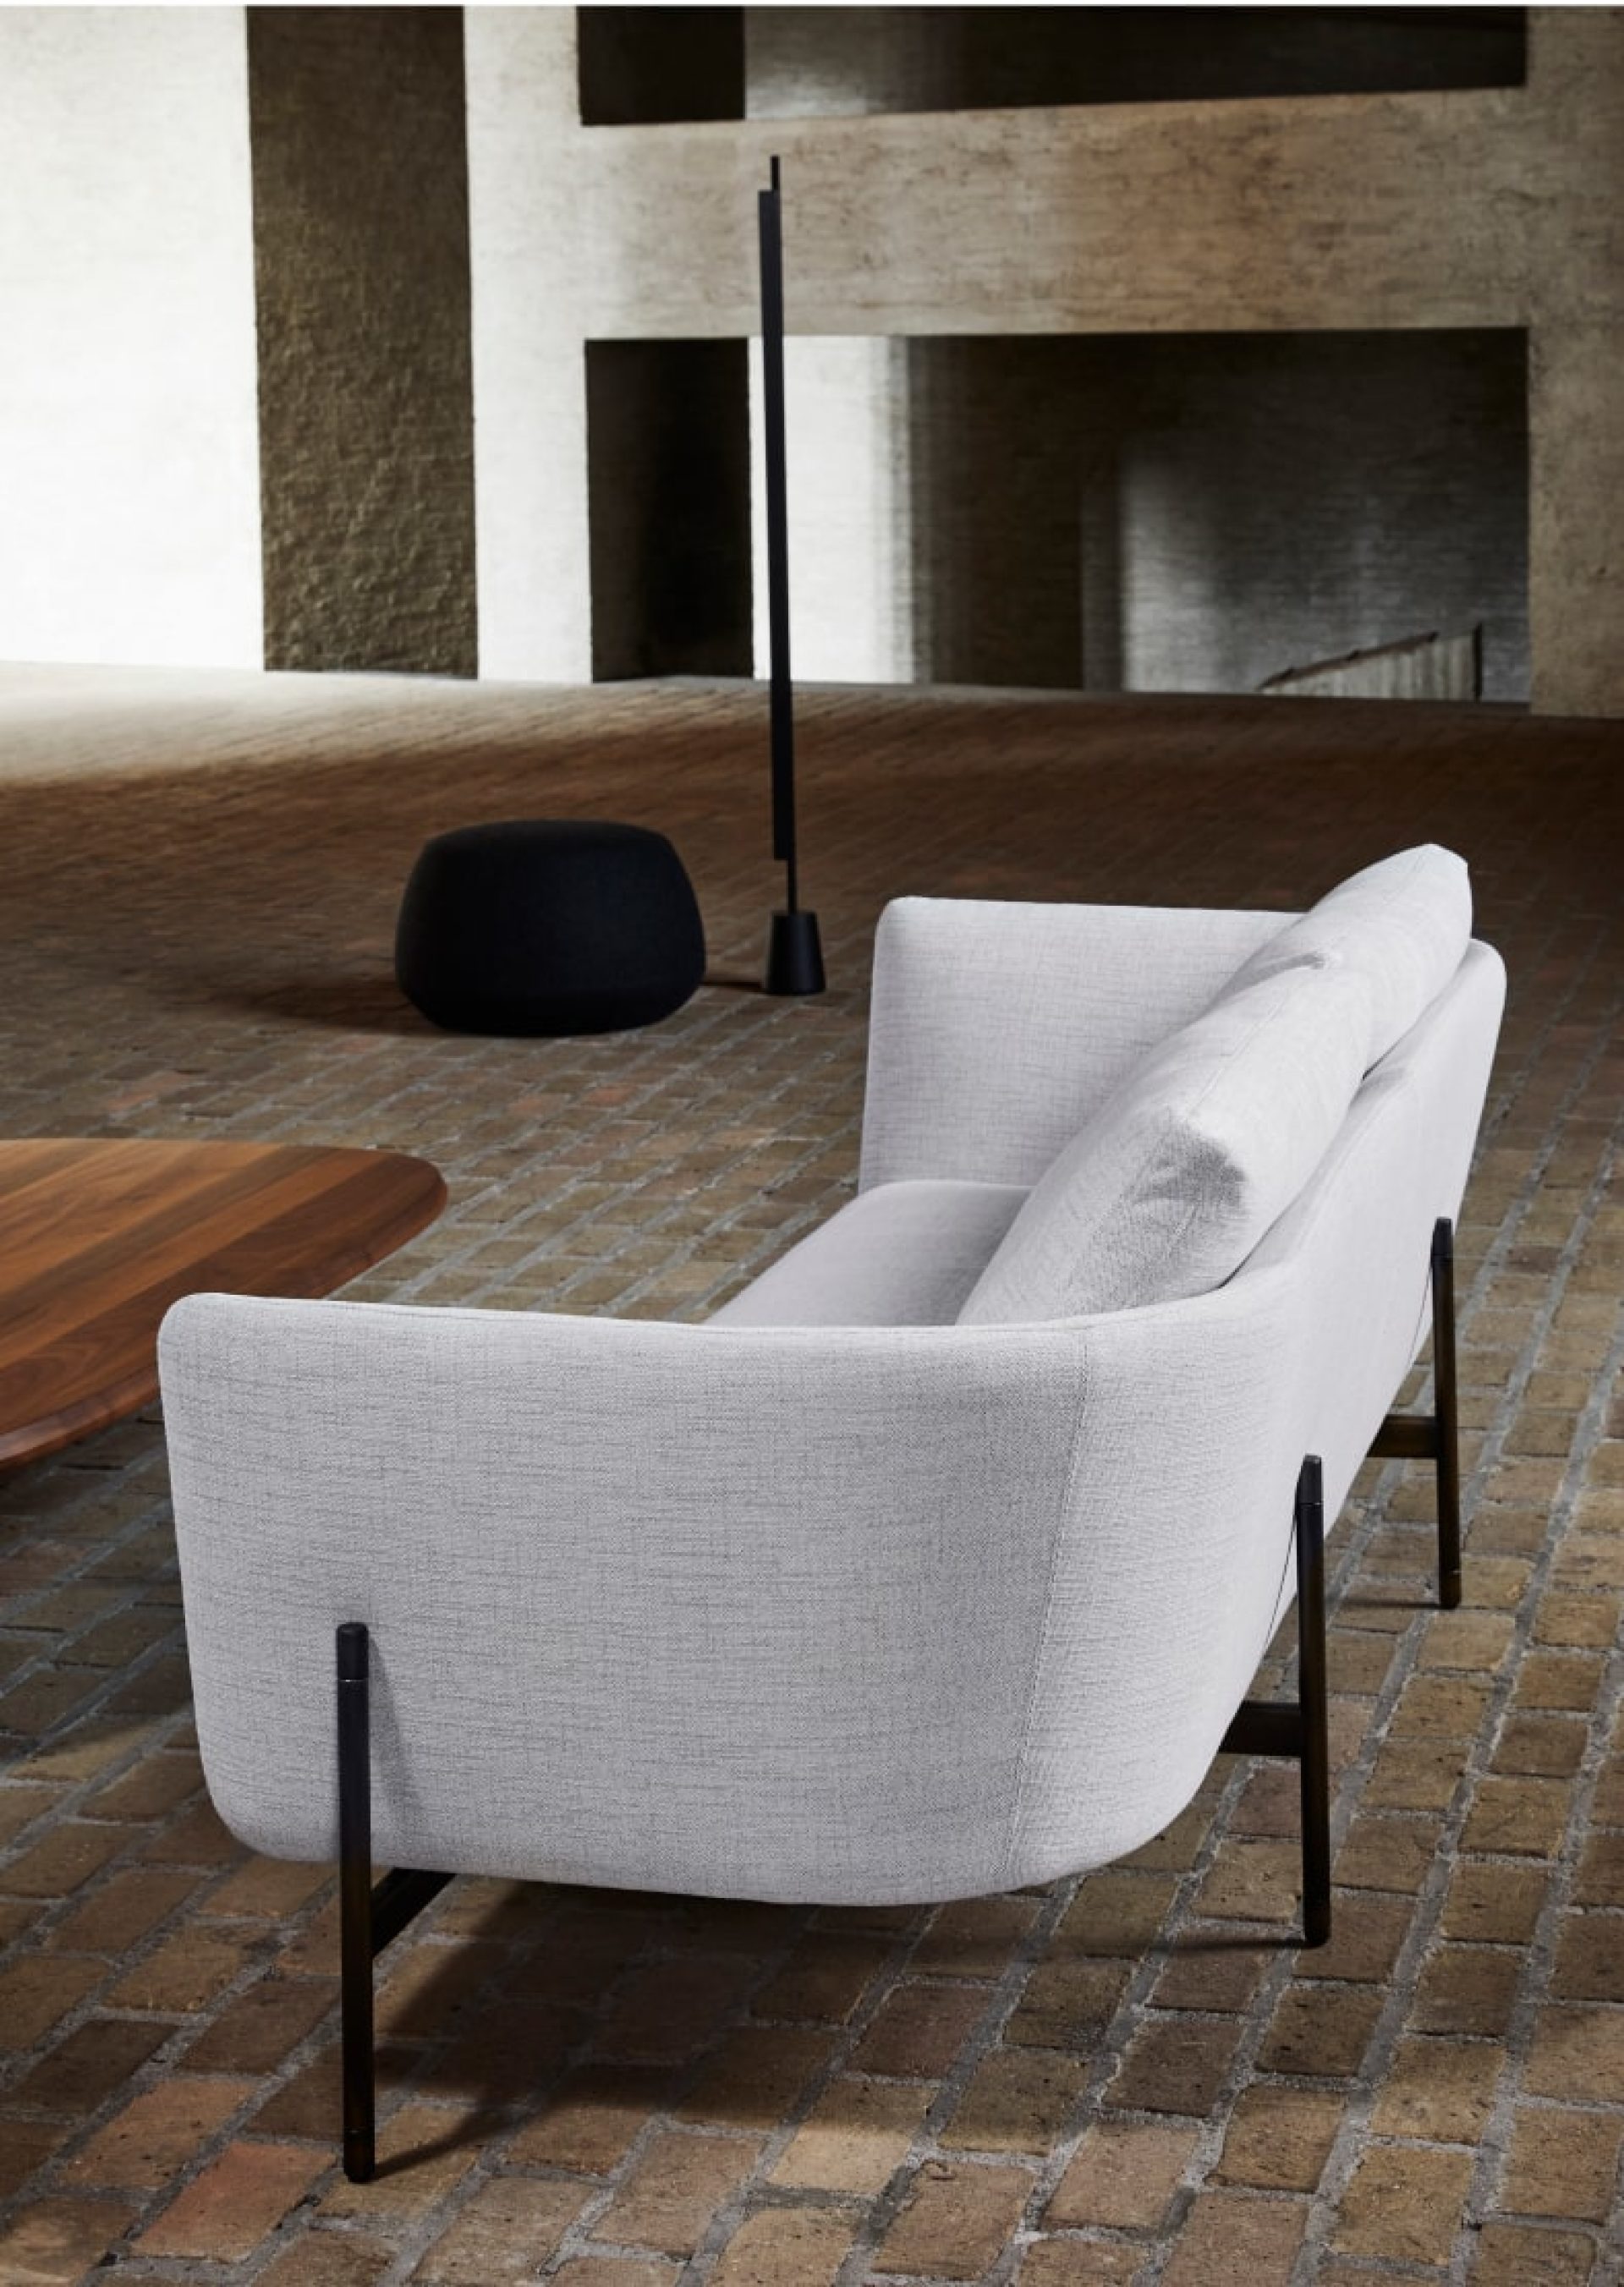 Light grey canvas sofa, black pouf and a wooden table